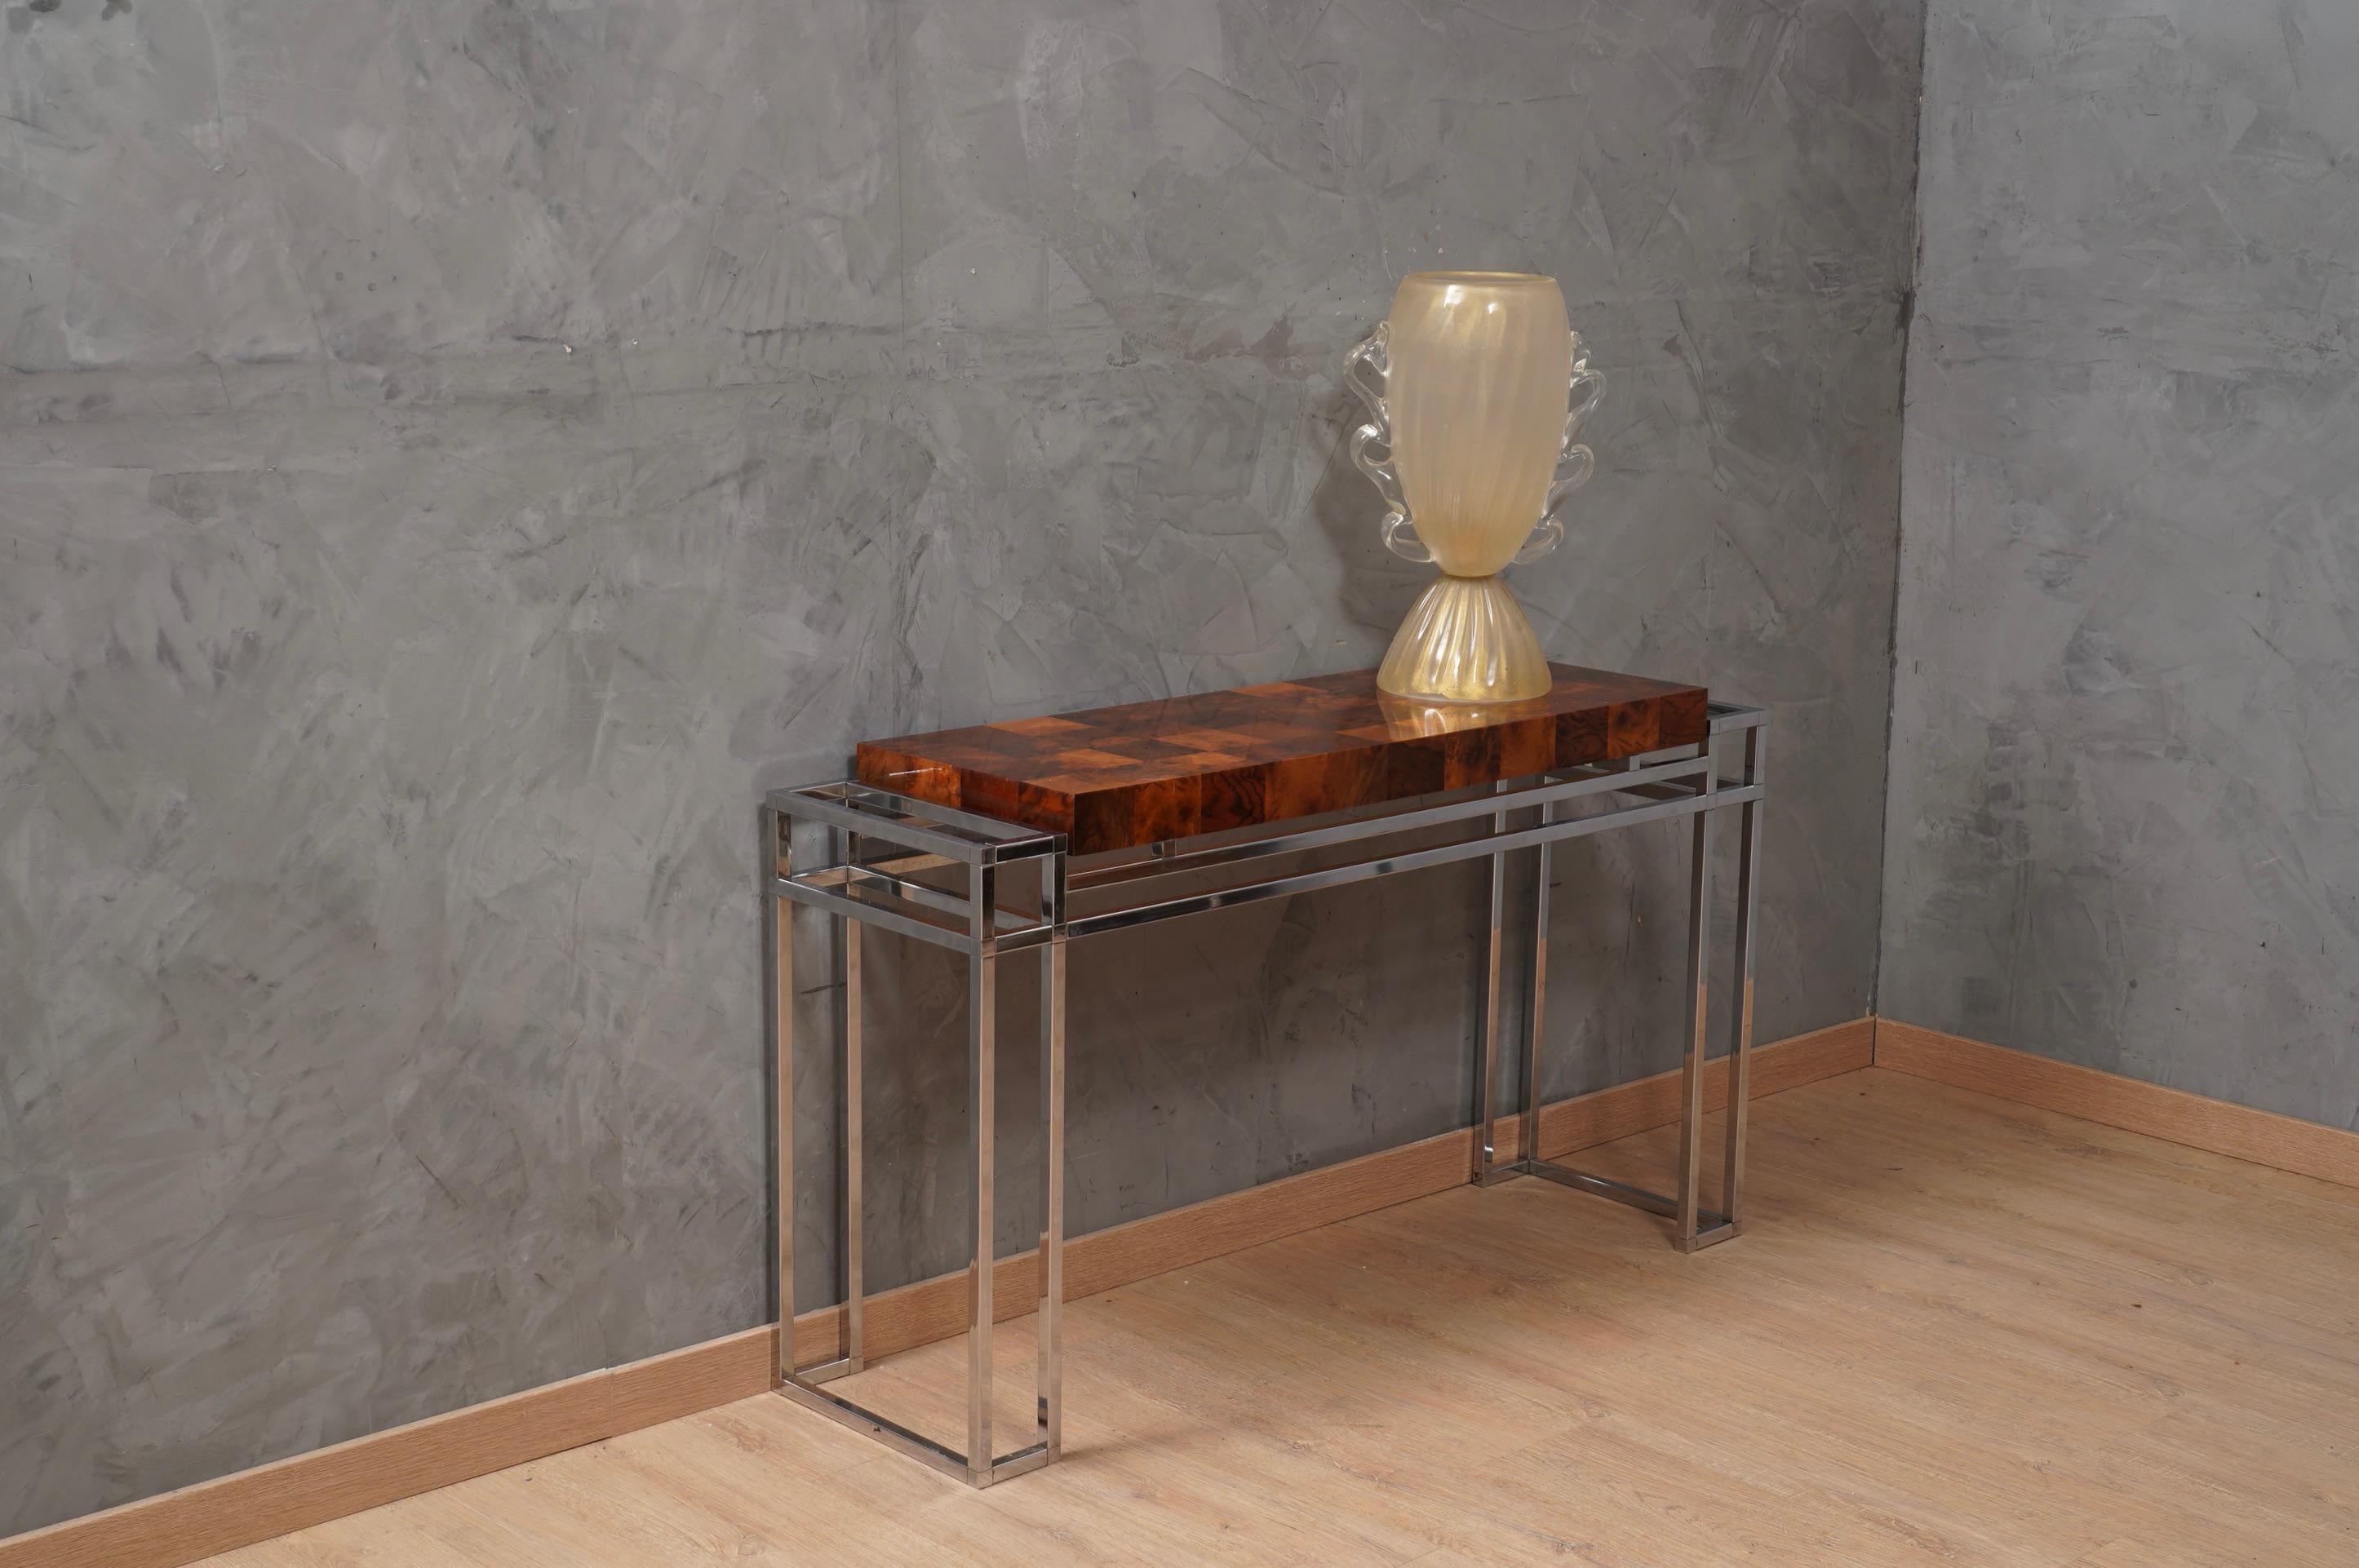 Refined and elegant console in chrome and wood, one of a kind design; chrome and wood design go perfectly together. This slick material turns this console table into a modernist sculpture with sharp and geometric corners.

The console is composed of